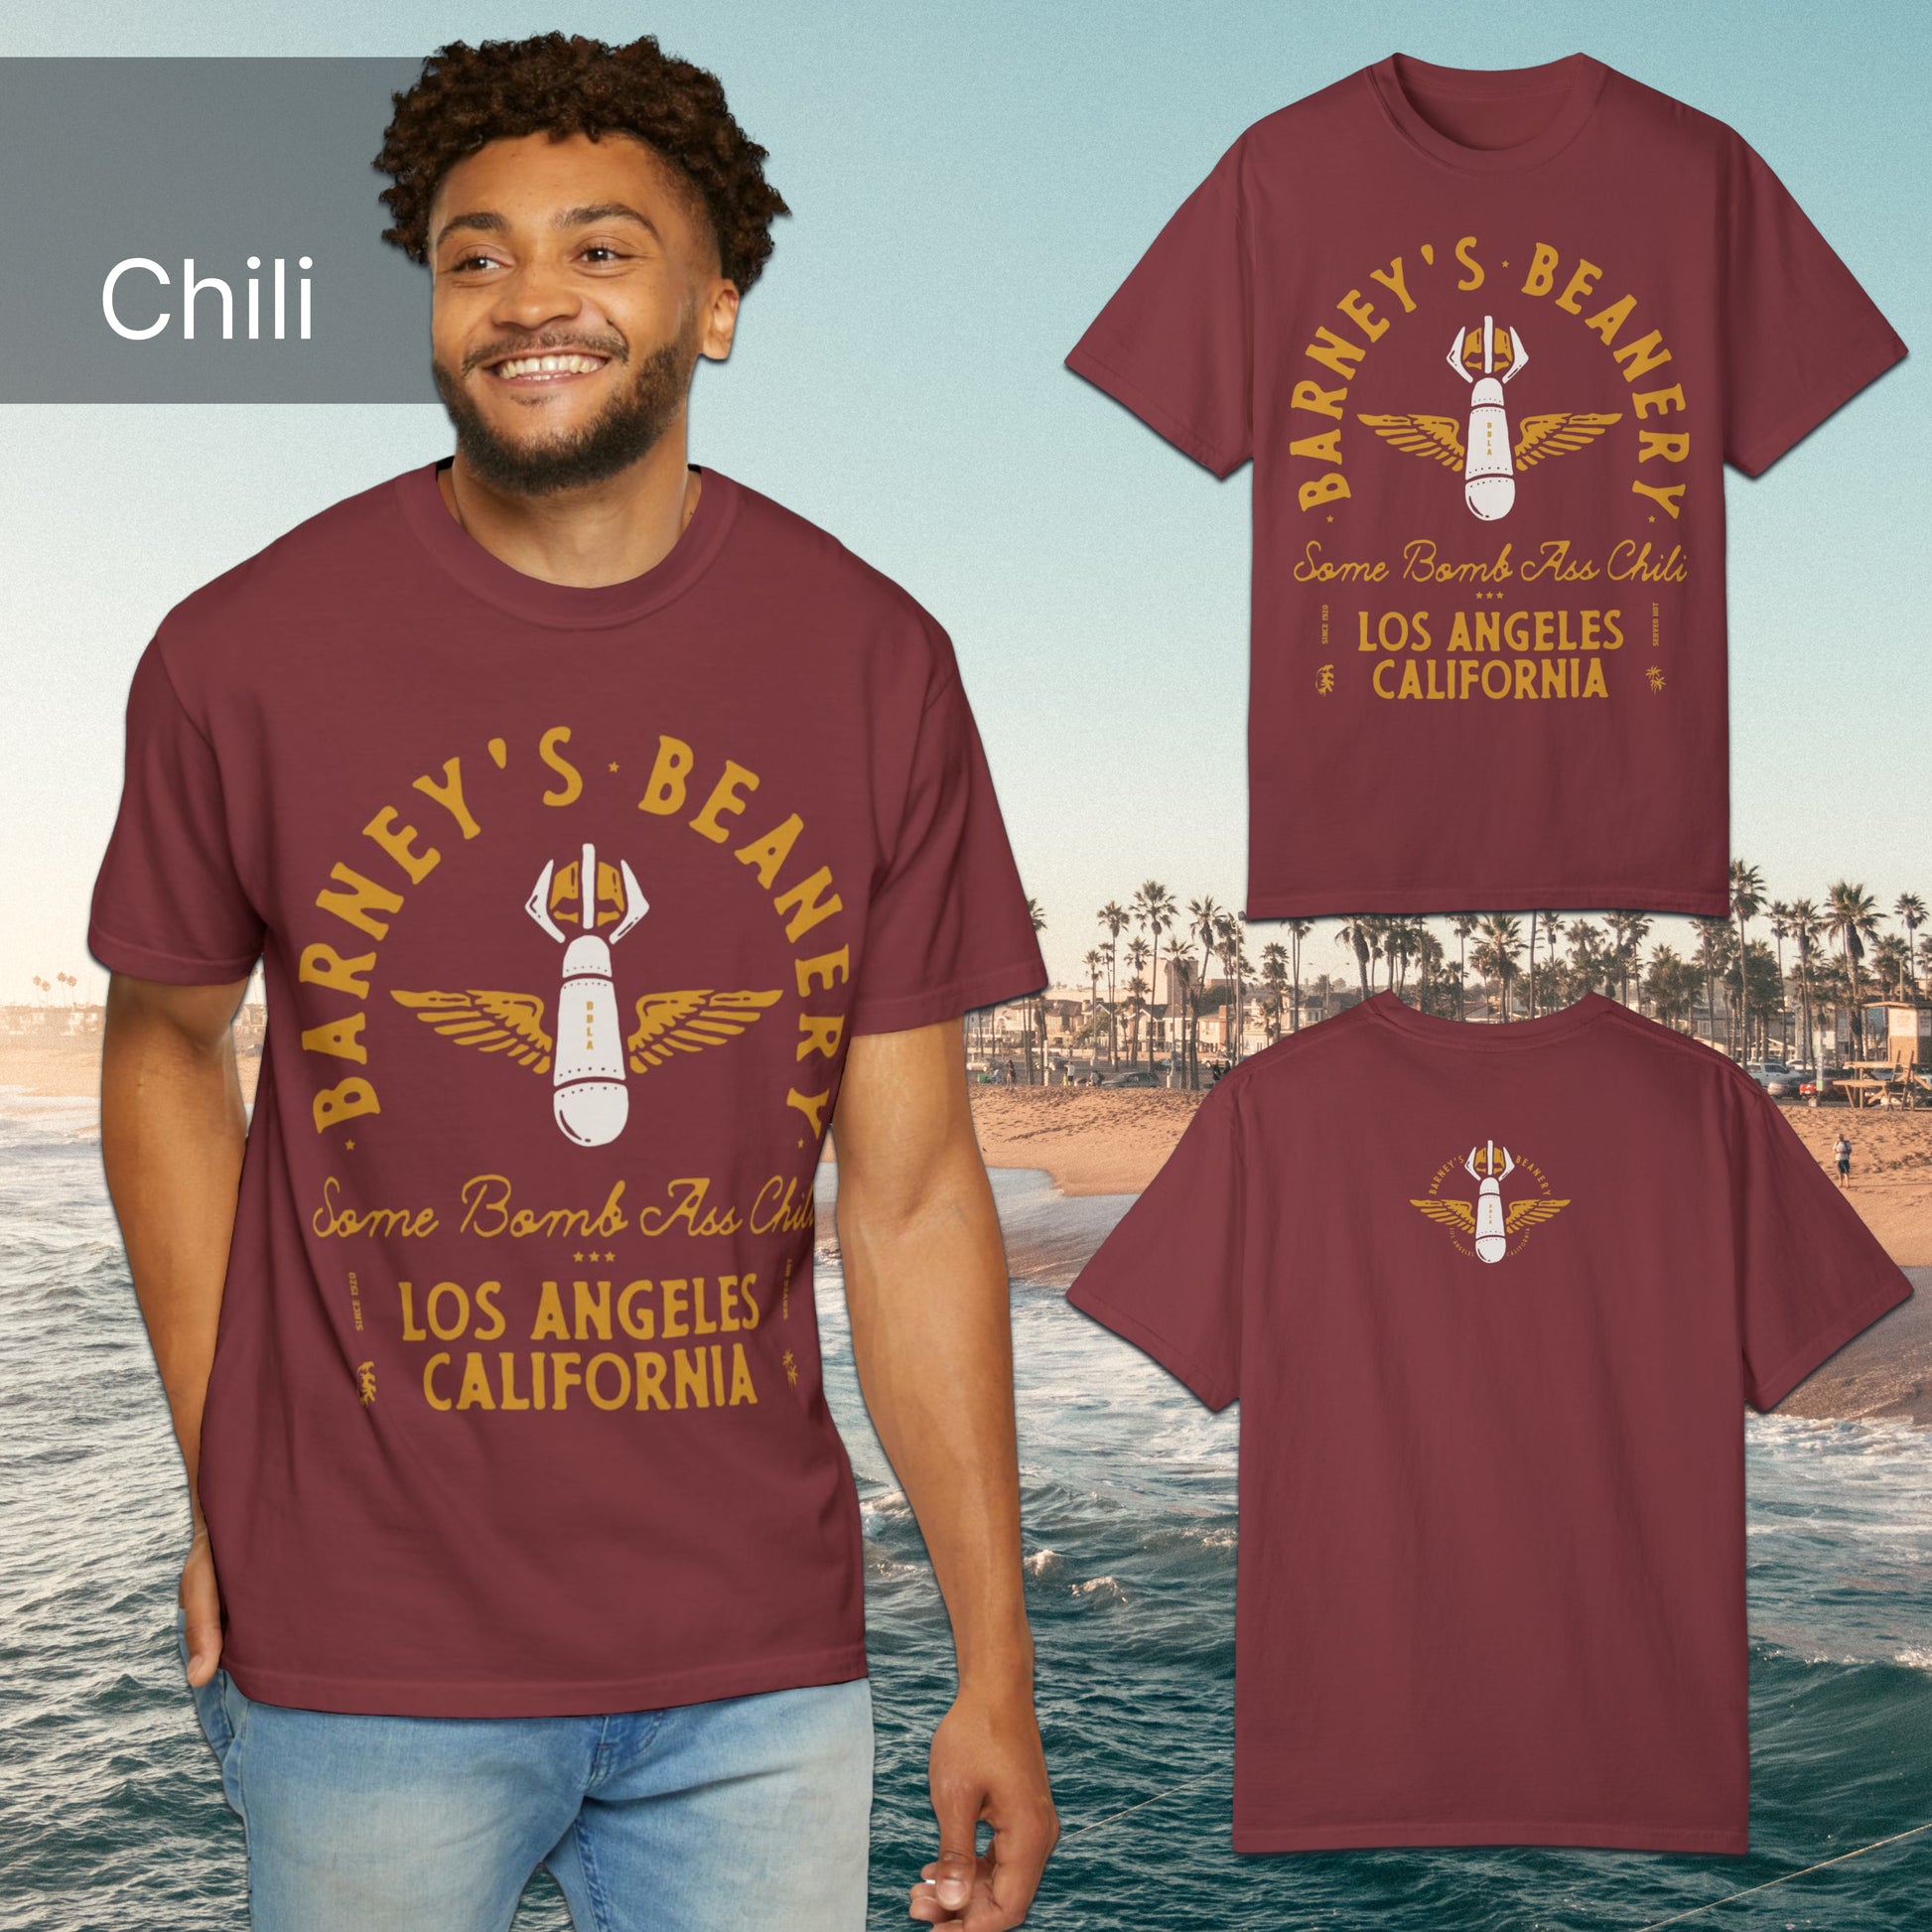 Some Bomb Ass Chili | BARNEY'S BEANERY - Men's Graphic Tee | Chili Comfort Colors 1717 T-Shirt - All Graphics On Front And Back Flat Lay View